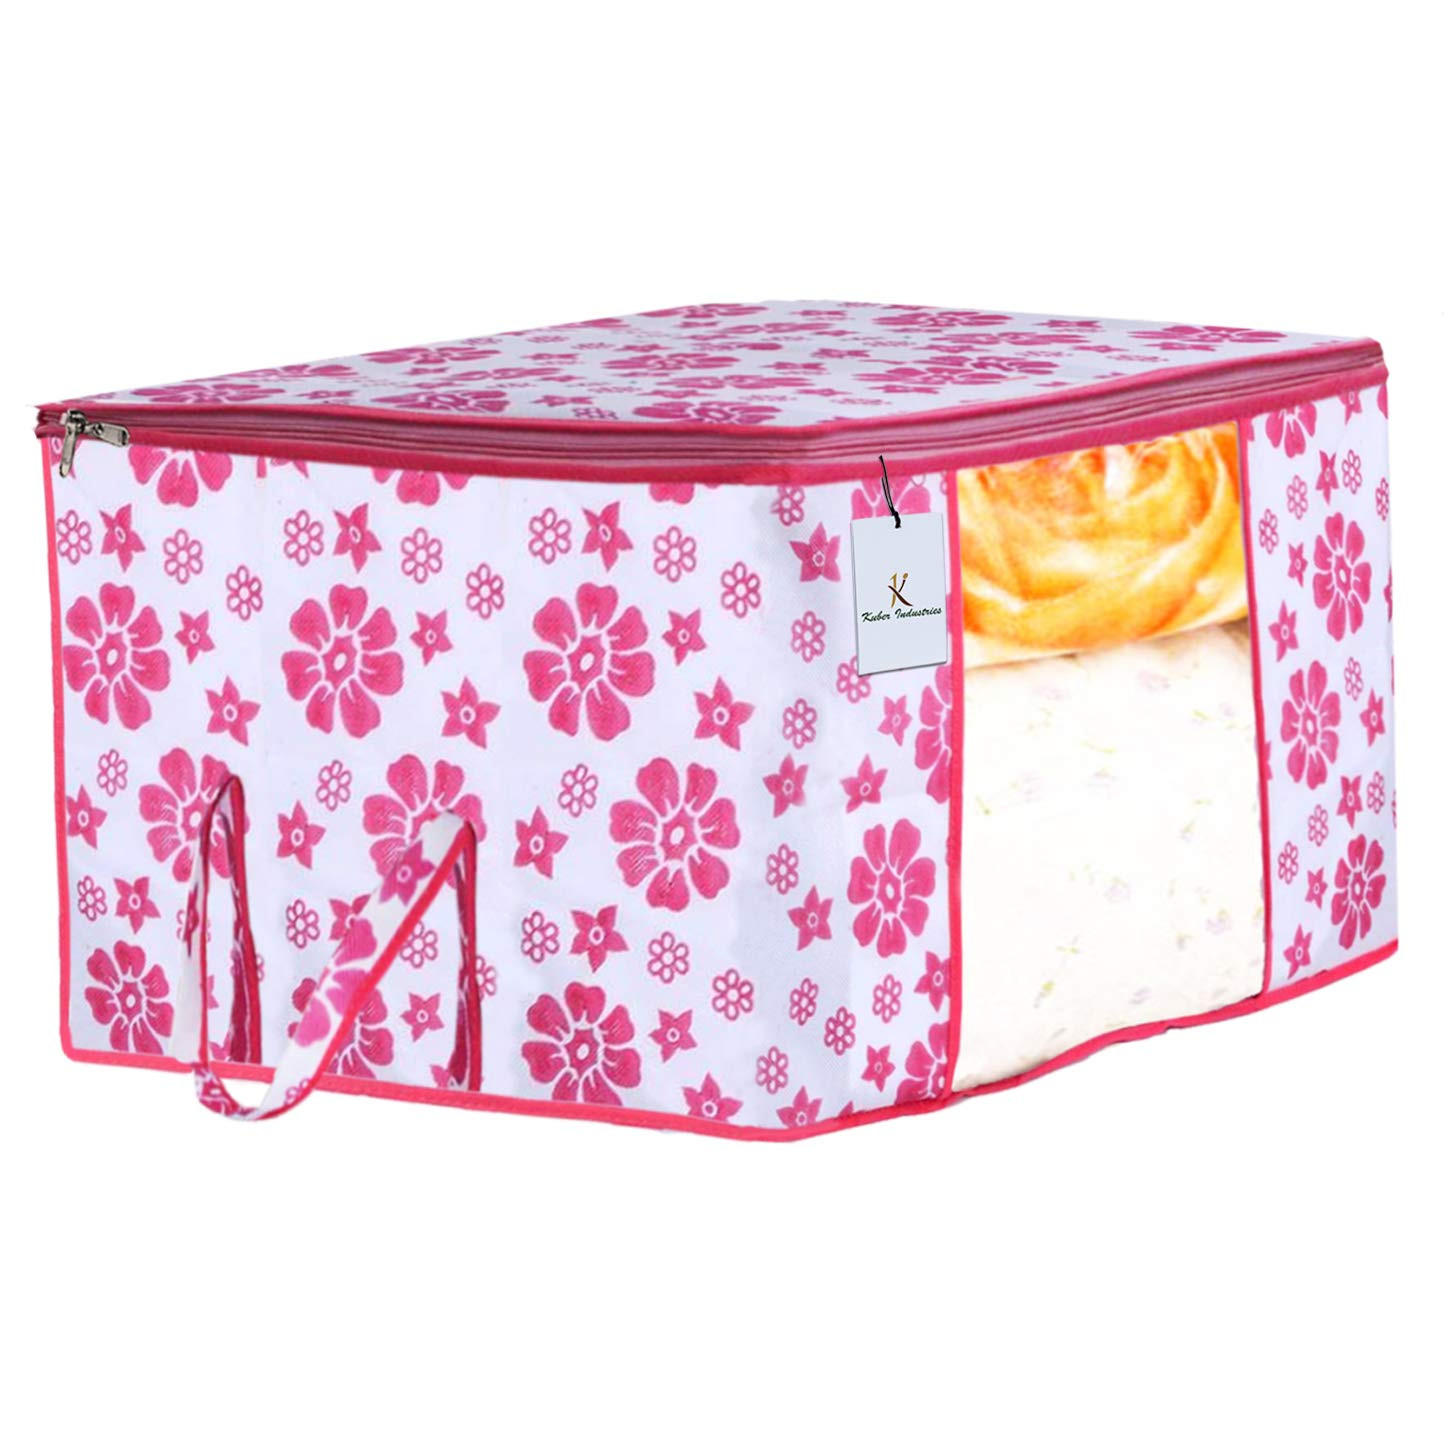 Kuber Industries Flower Design Non Woven Fabric Underbed Storage Bag,Cloth Organiser,Blanket Cover with Transparent Window, Pink & Blue -CTKTC41041